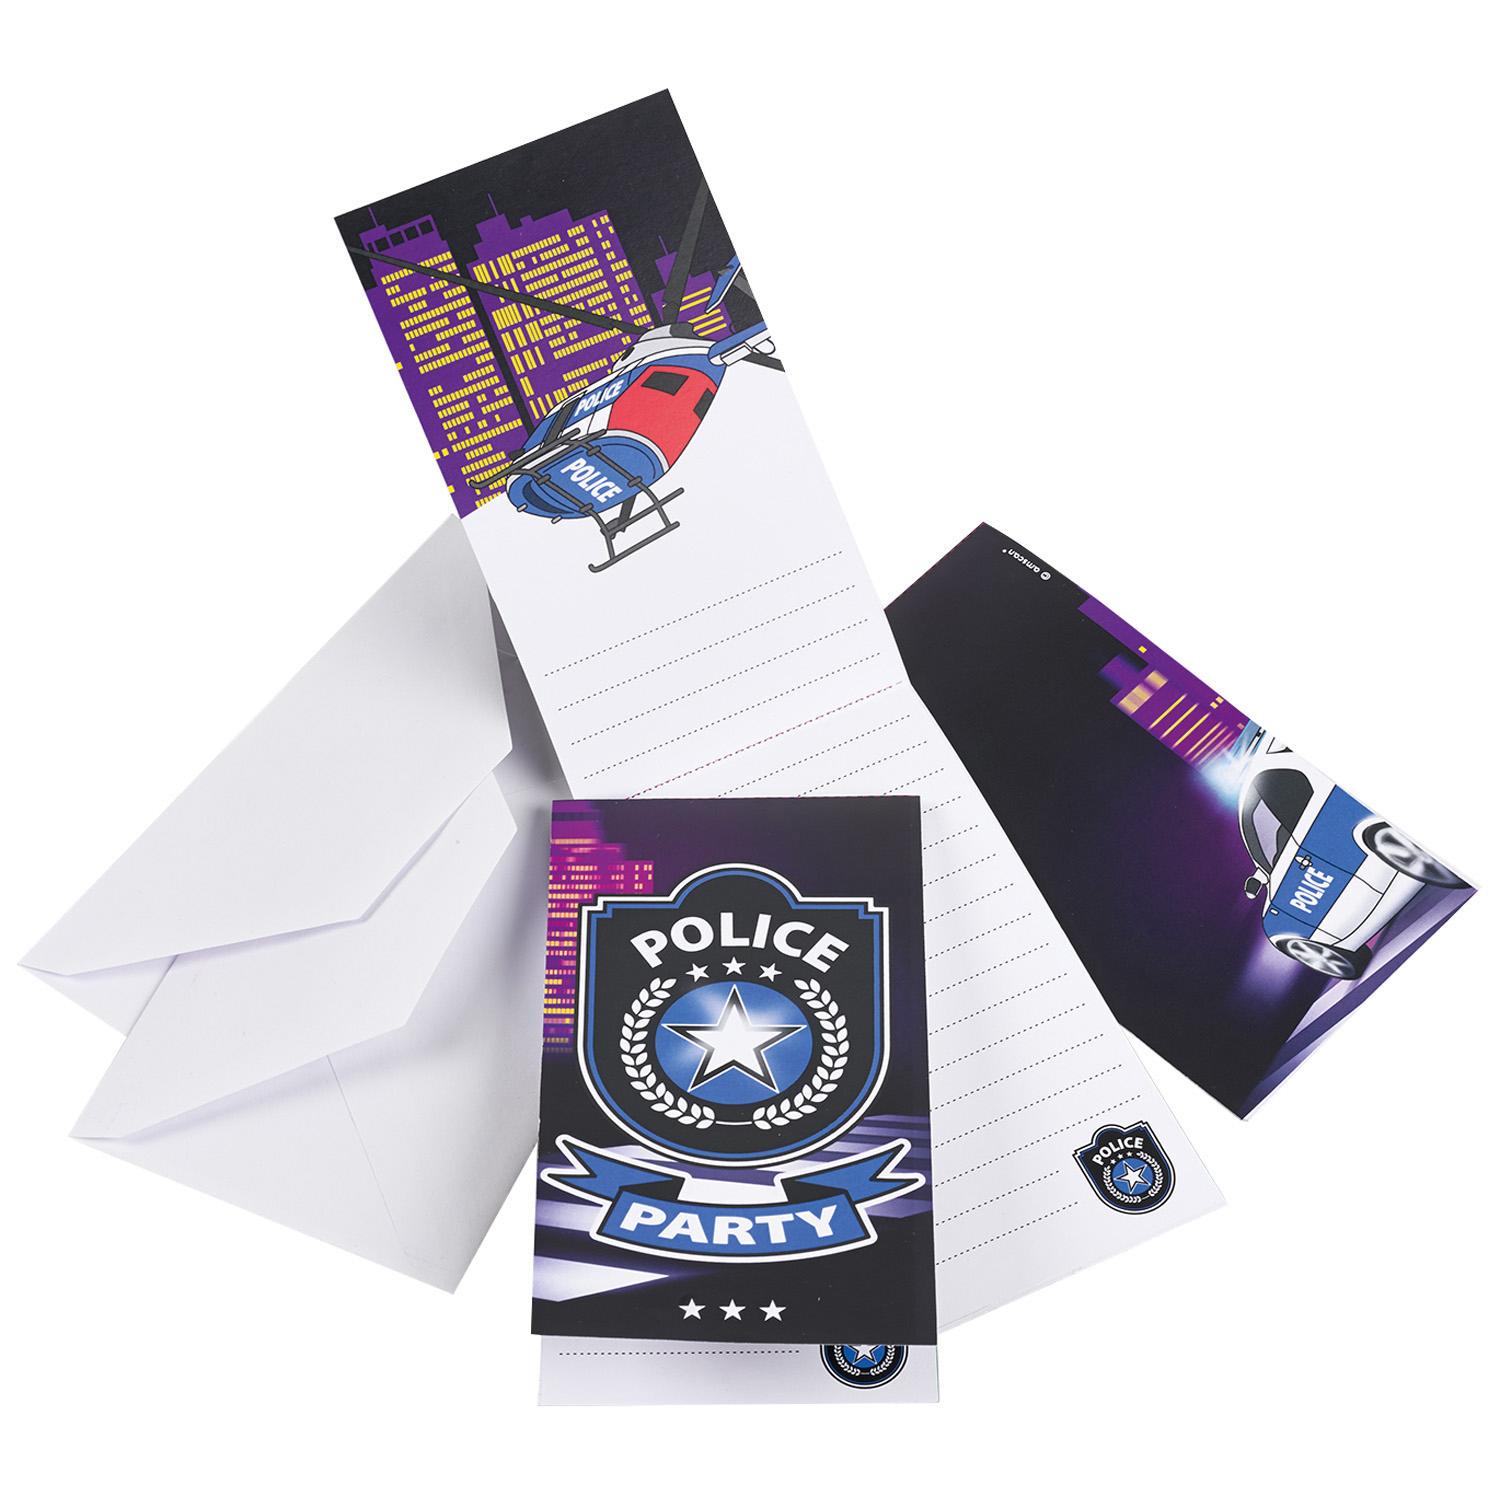 Police Invitation Cards & Envelopes 8pcs Party Accessories - Party Centre